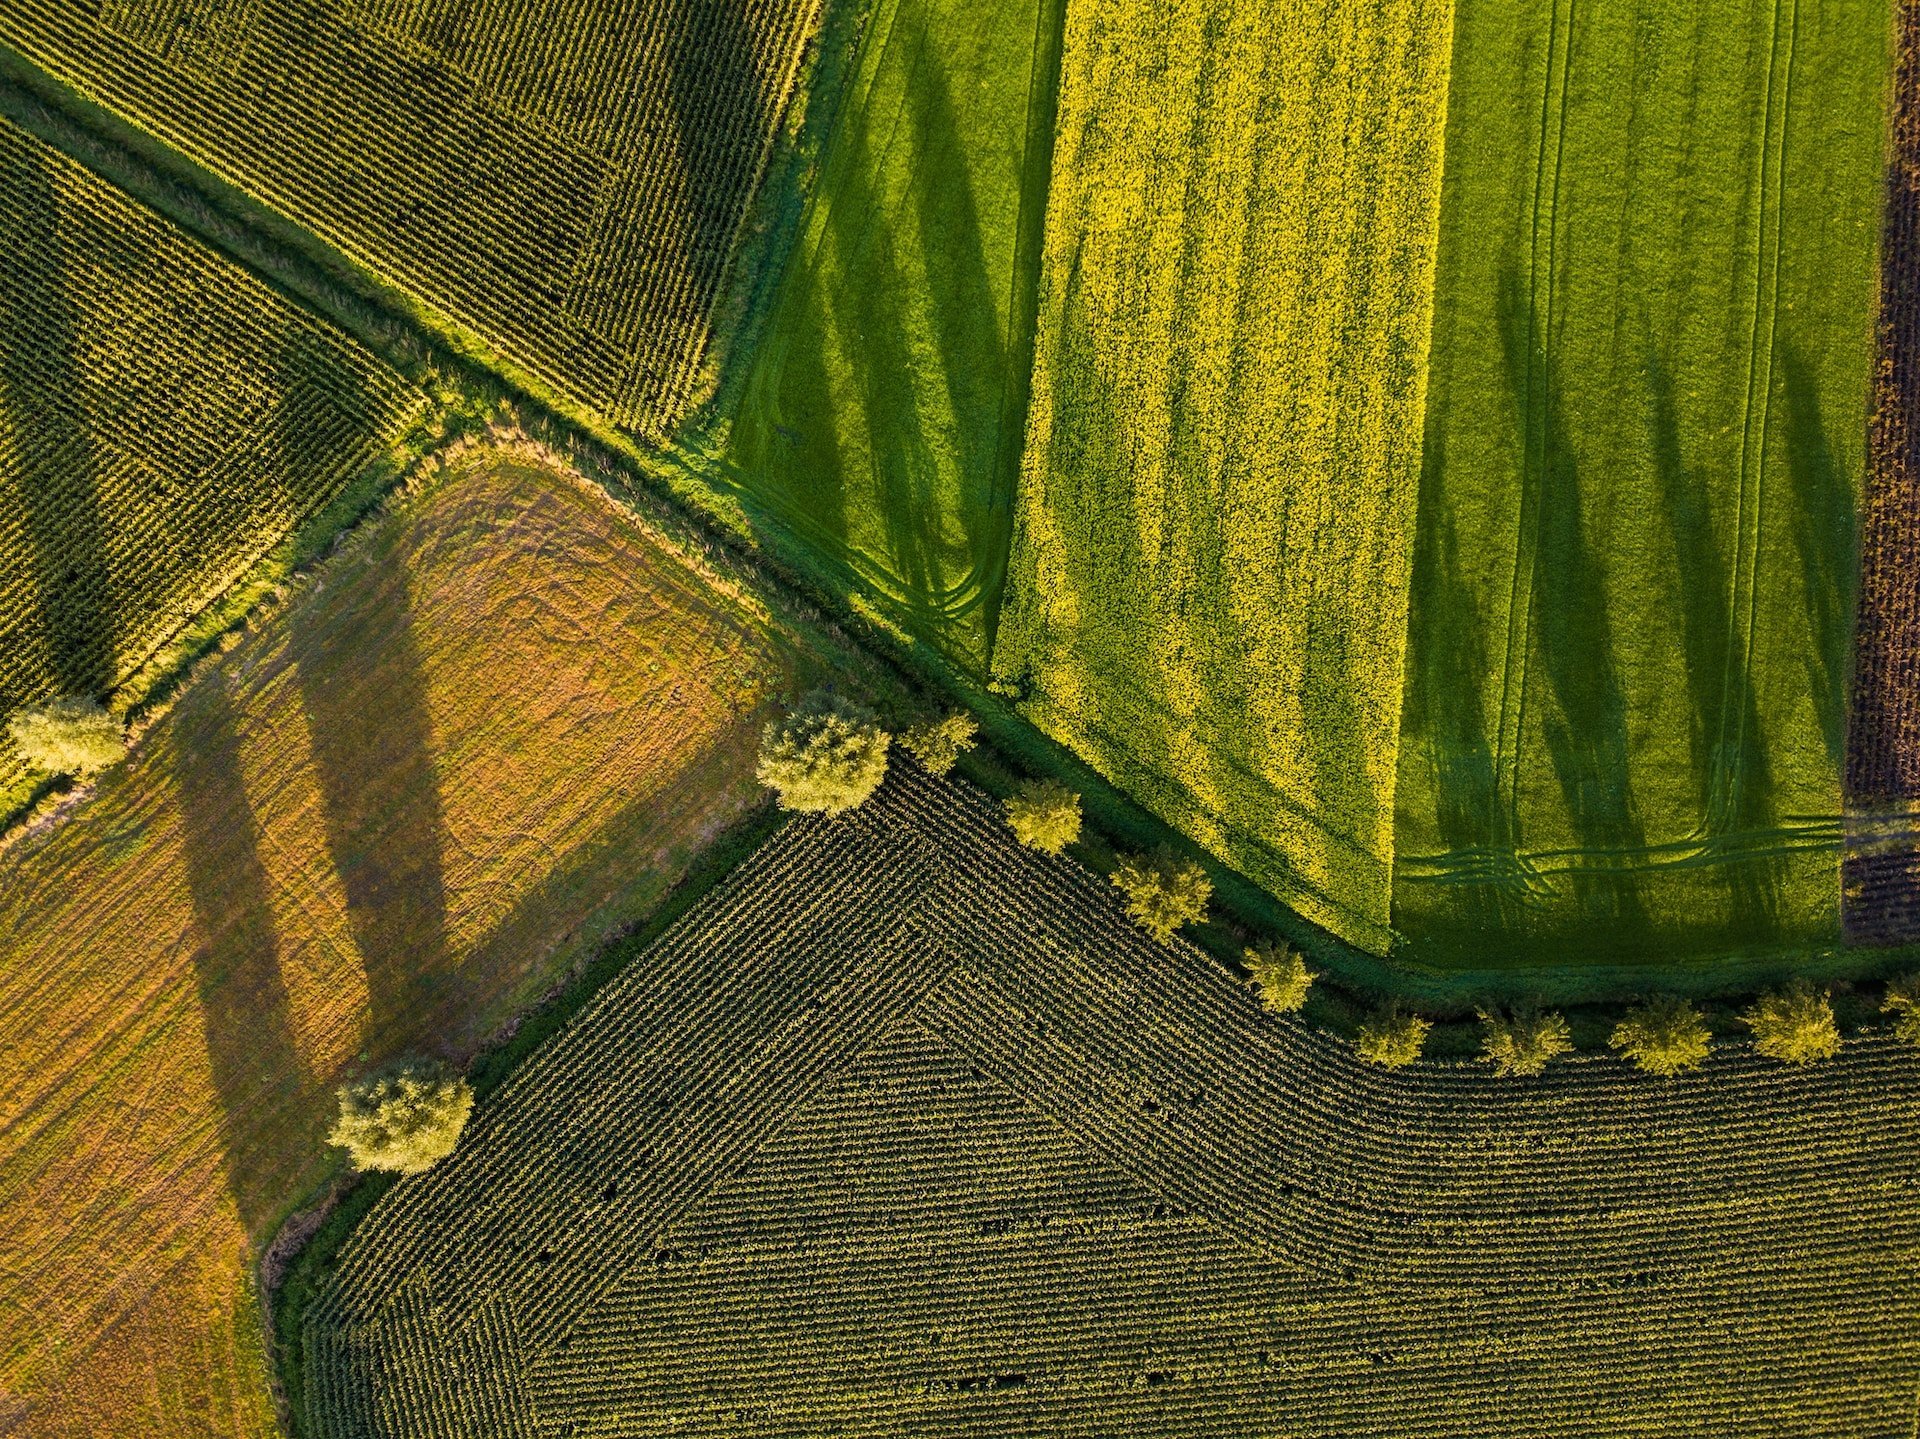 Depicts several farm fields next to each other, divided by a road. Used as a cover image for a post about AcreTrader vs FarmTogether.